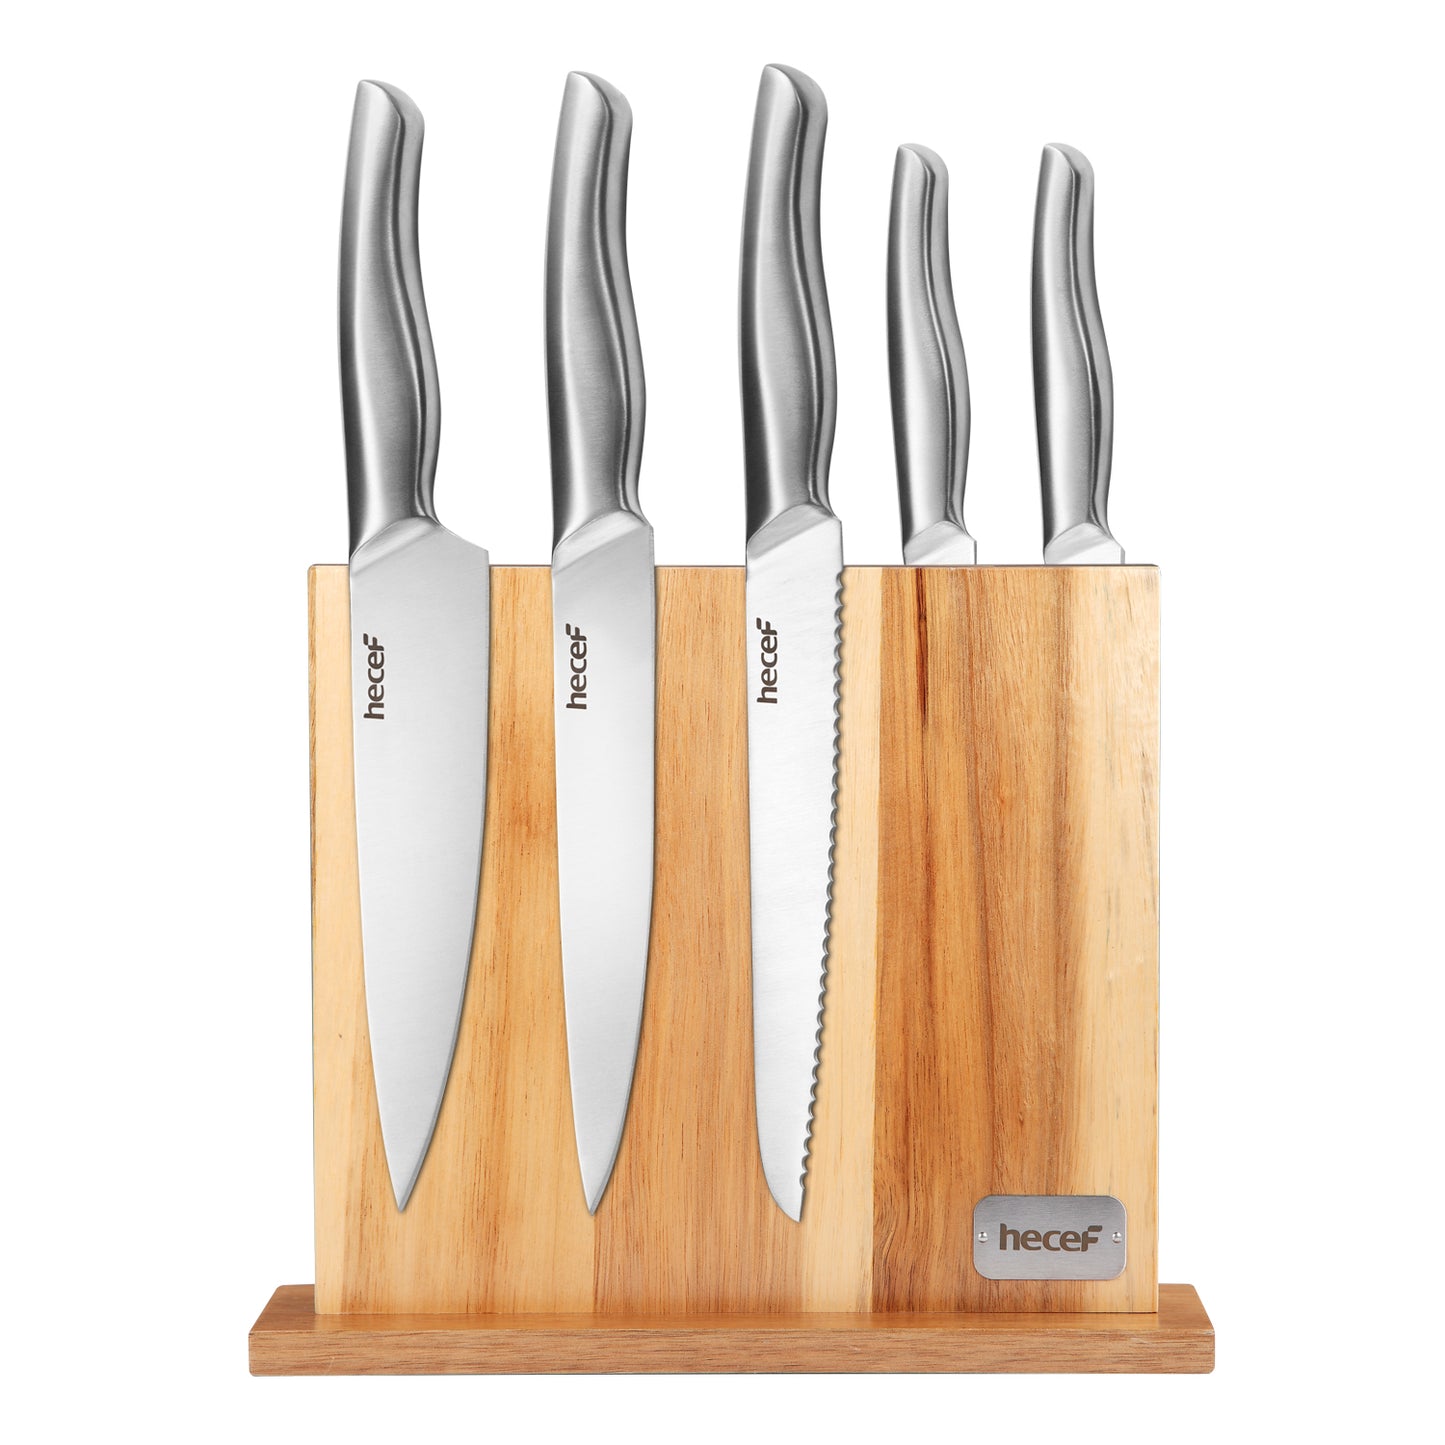 Knife Set with magnetic Knife Holder Stand - 6 PC White Knife Set Includes  White Handle Knife Set with Ashwood Knife Block - W - AliExpress